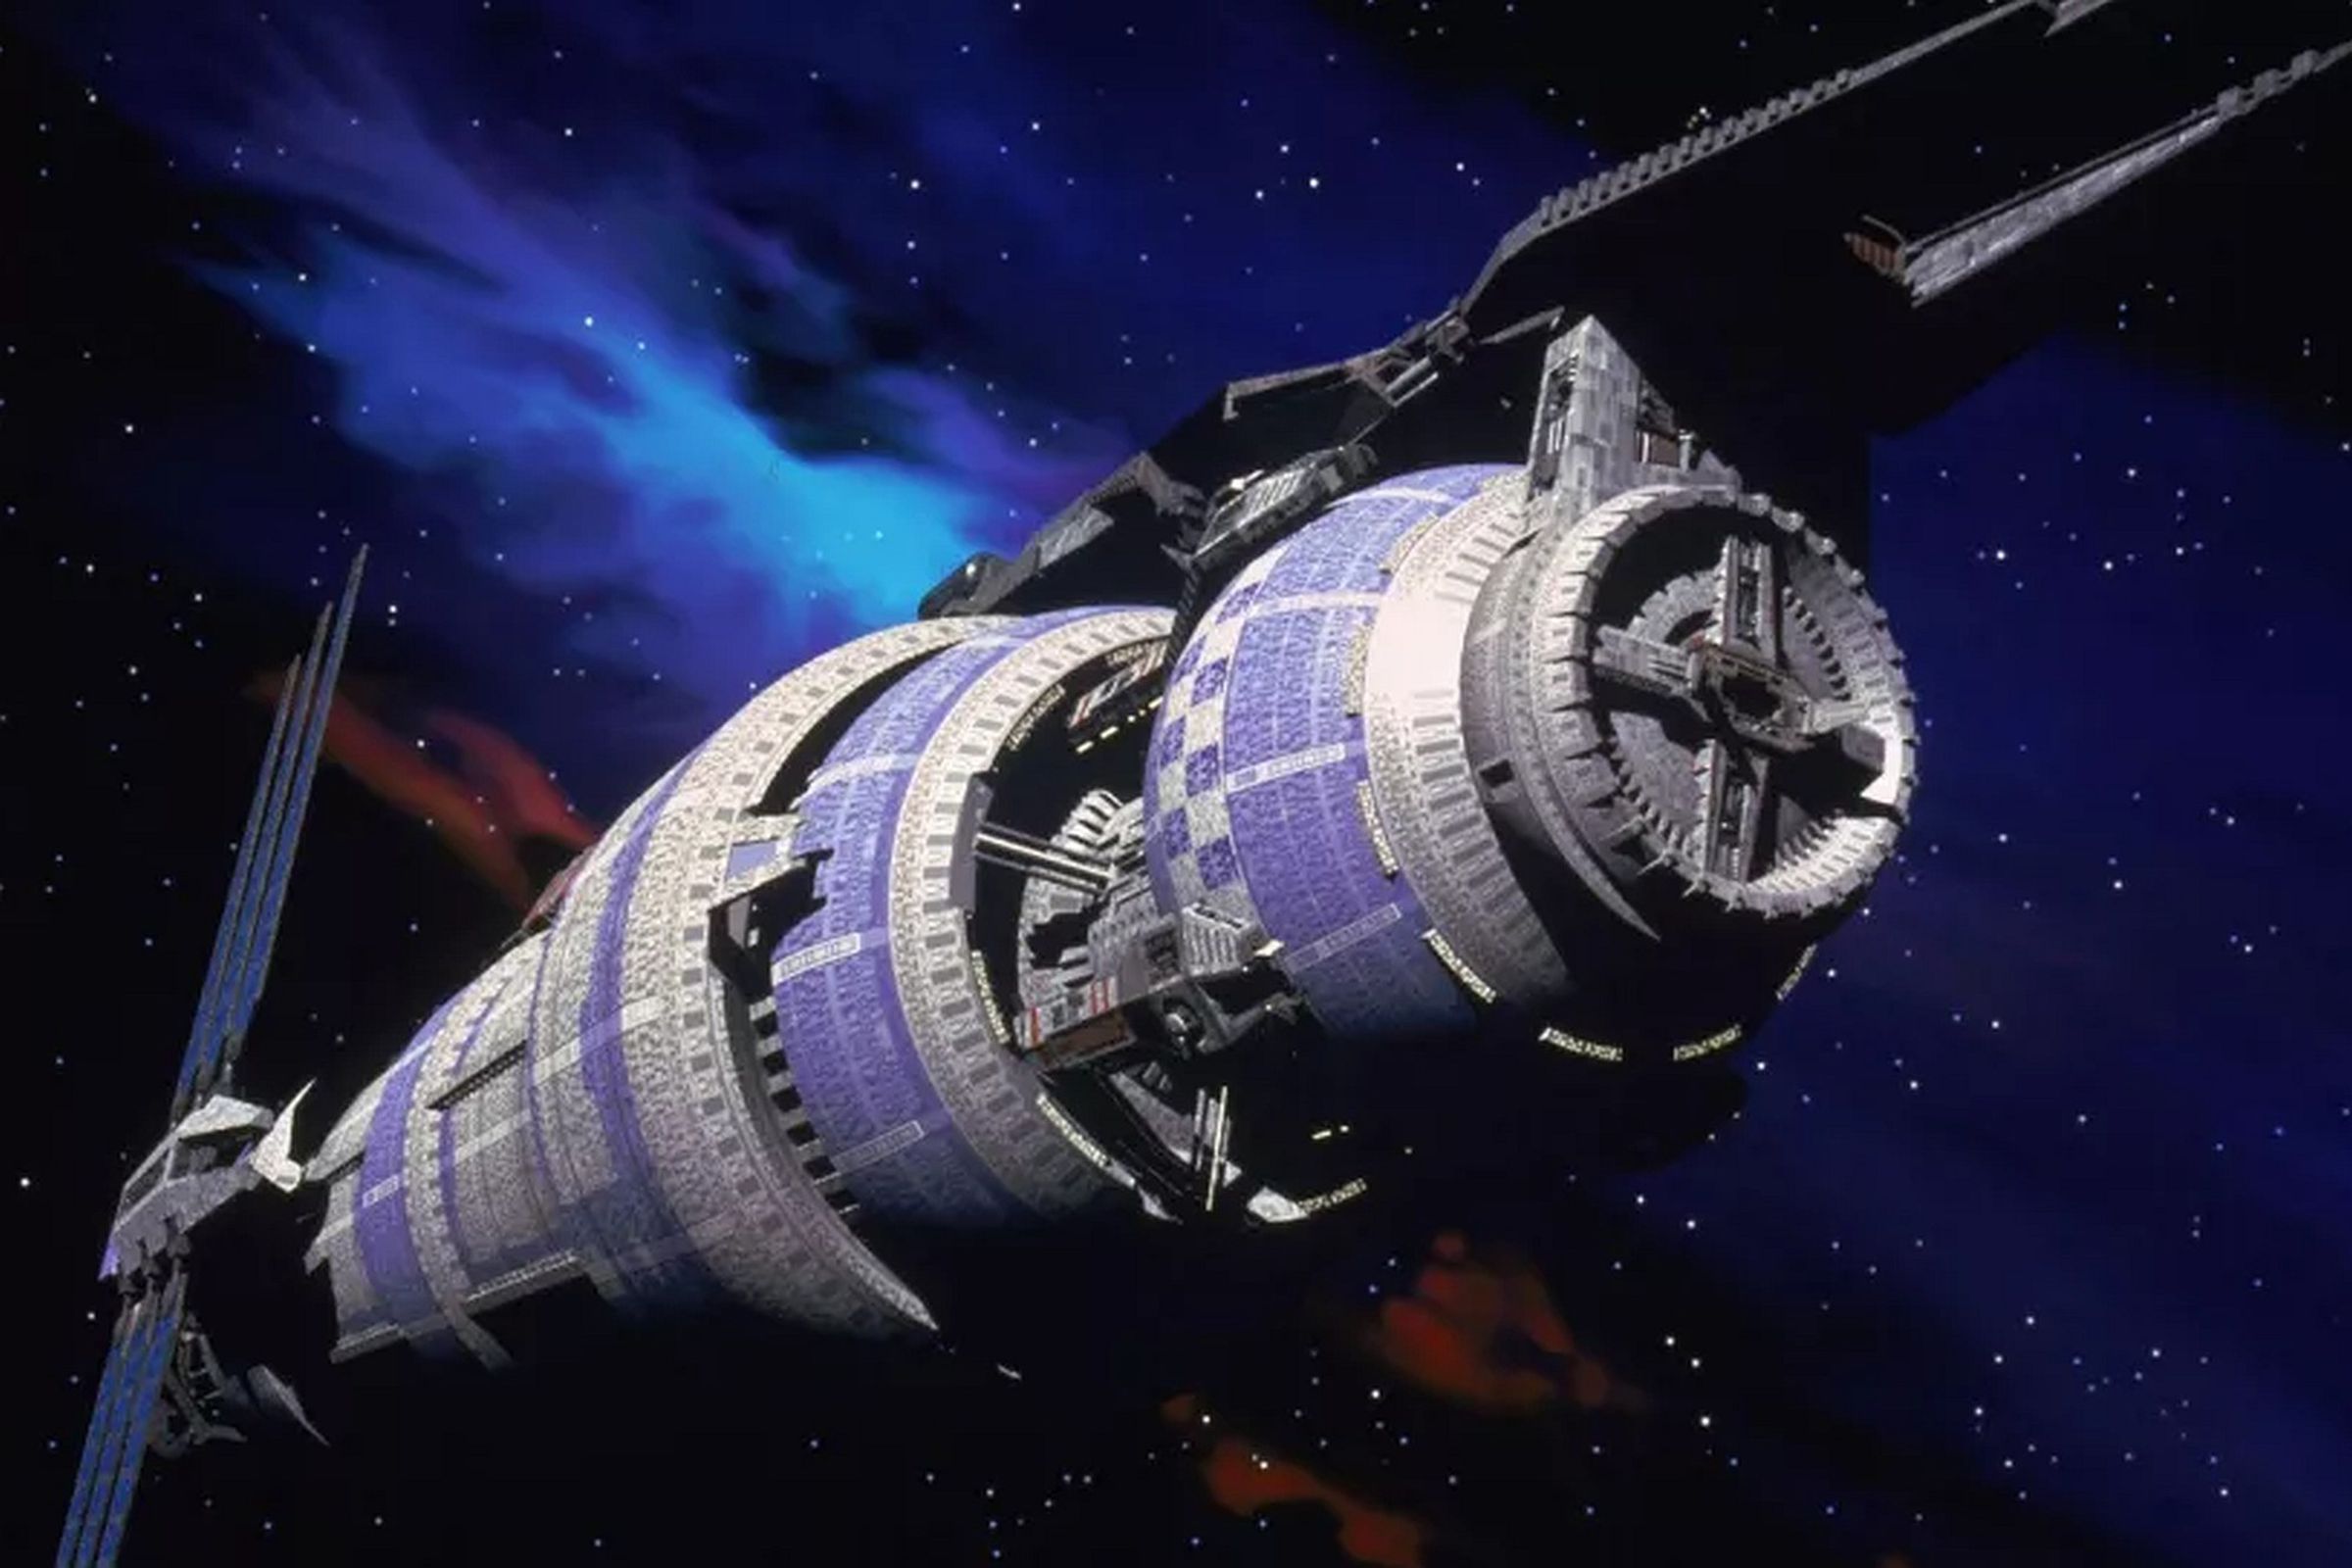 A purple and grey cylindrical space station in space, with big fins and solar panels jutting out.